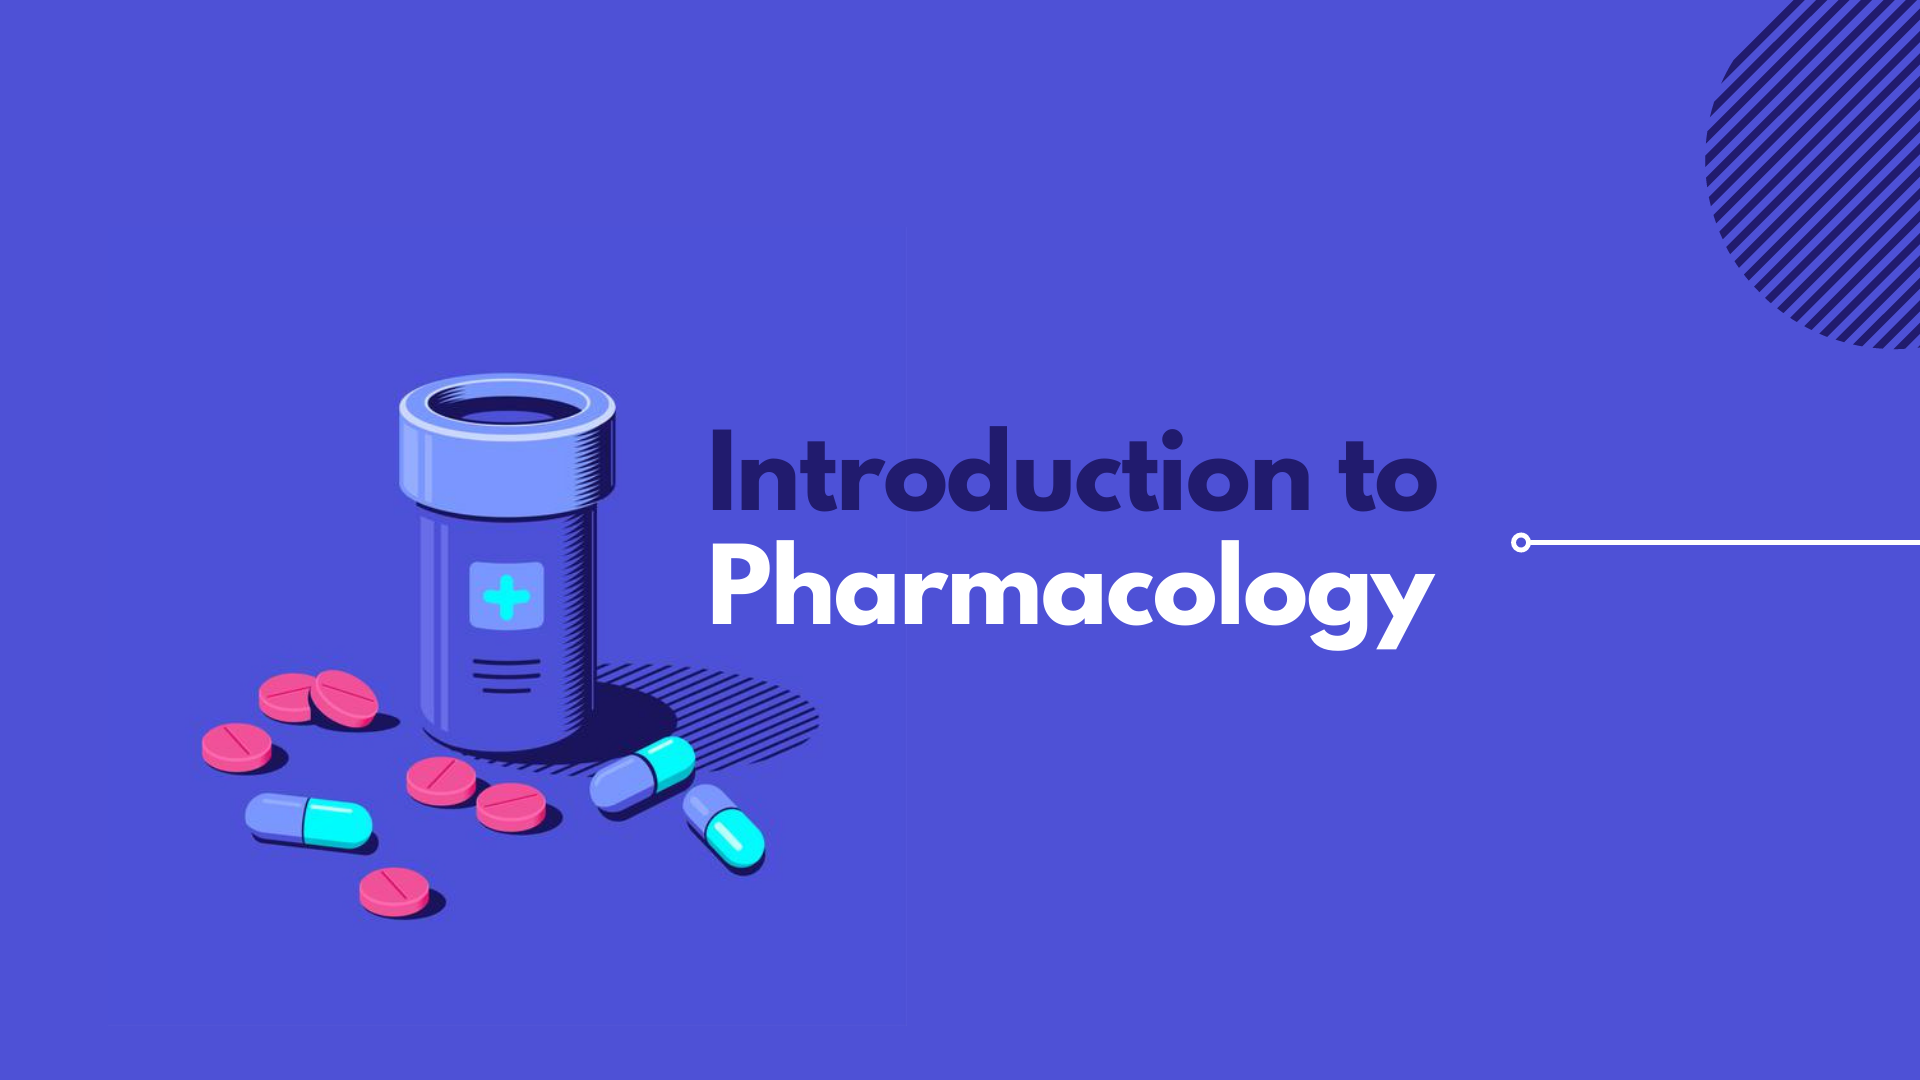 Introduction to Pharmacology course image